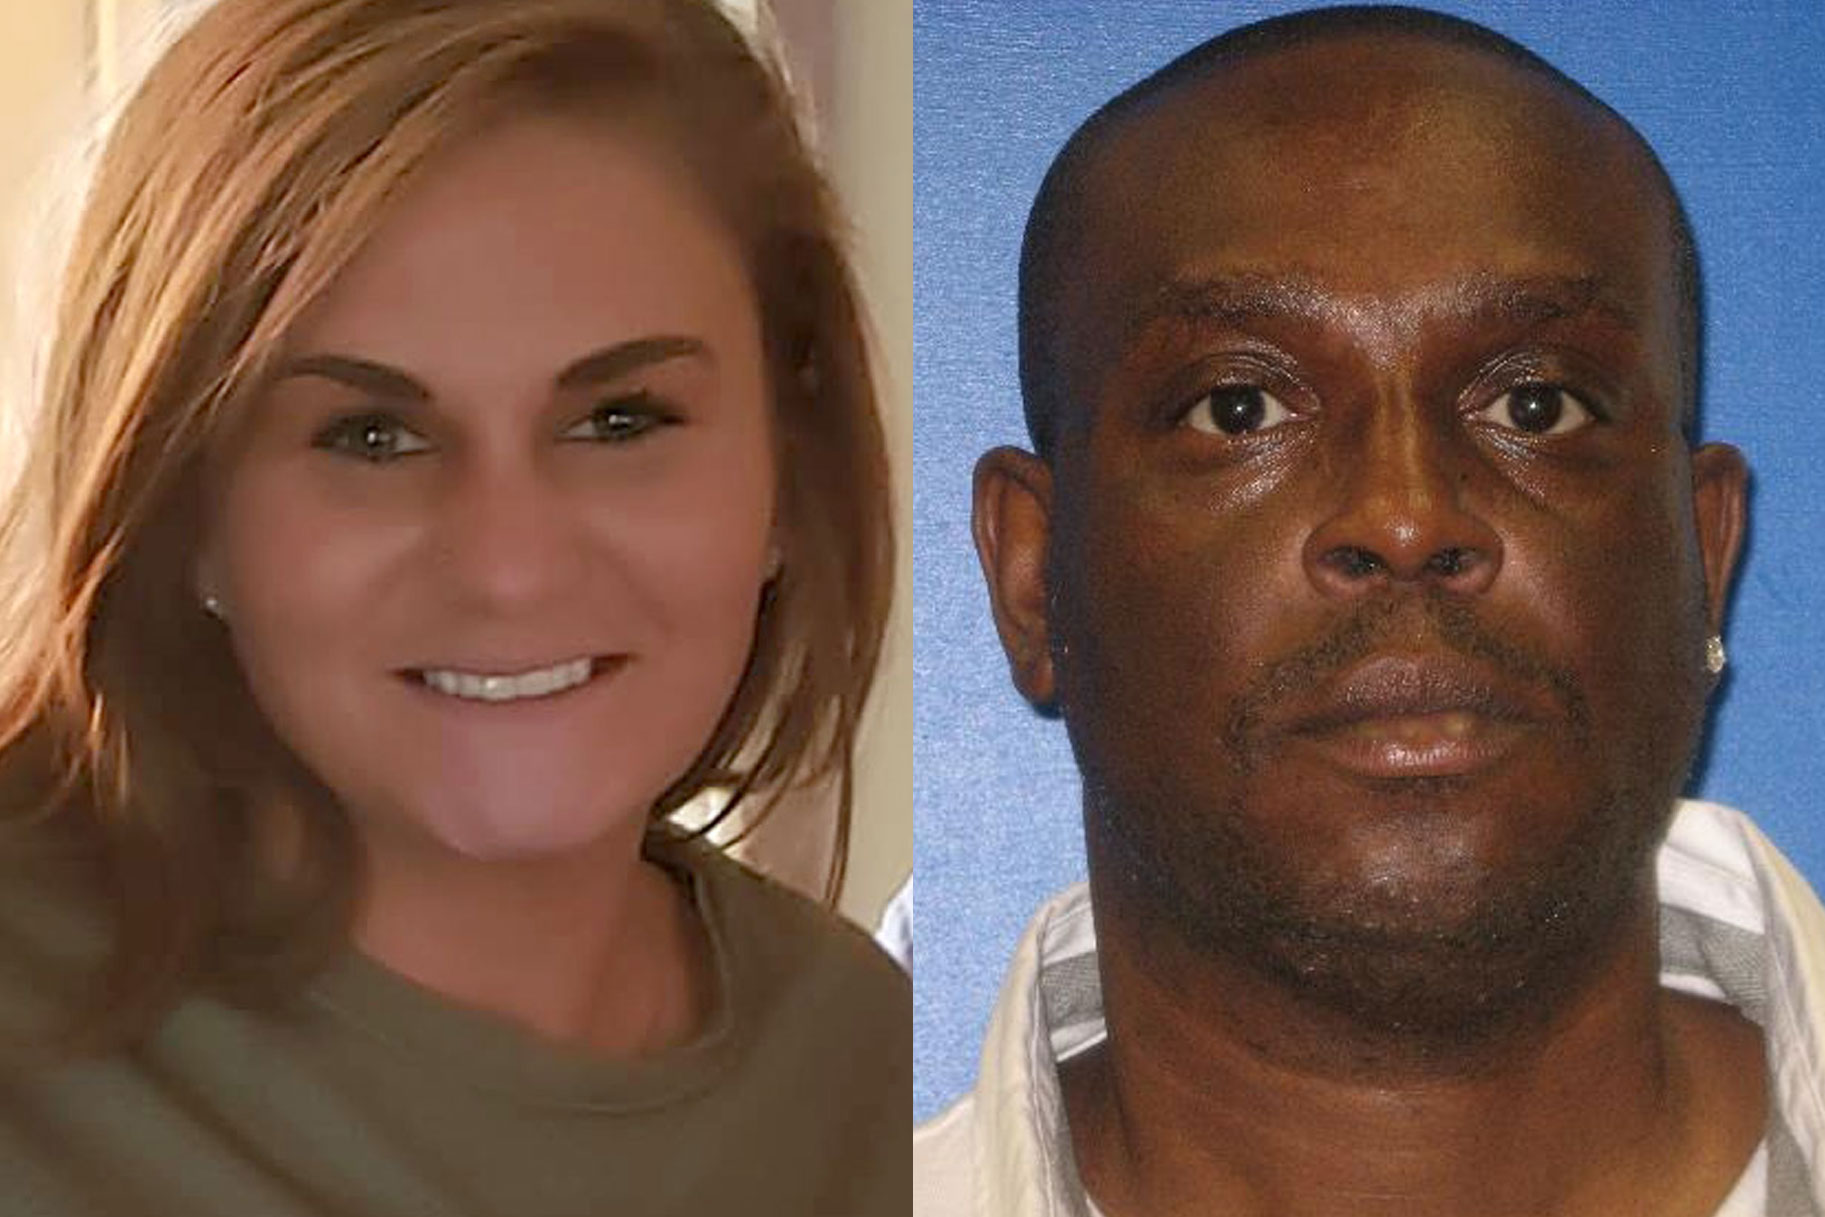 Sex Offender Wanted In Connection To Missing Alabama Woman’s Death Captured...